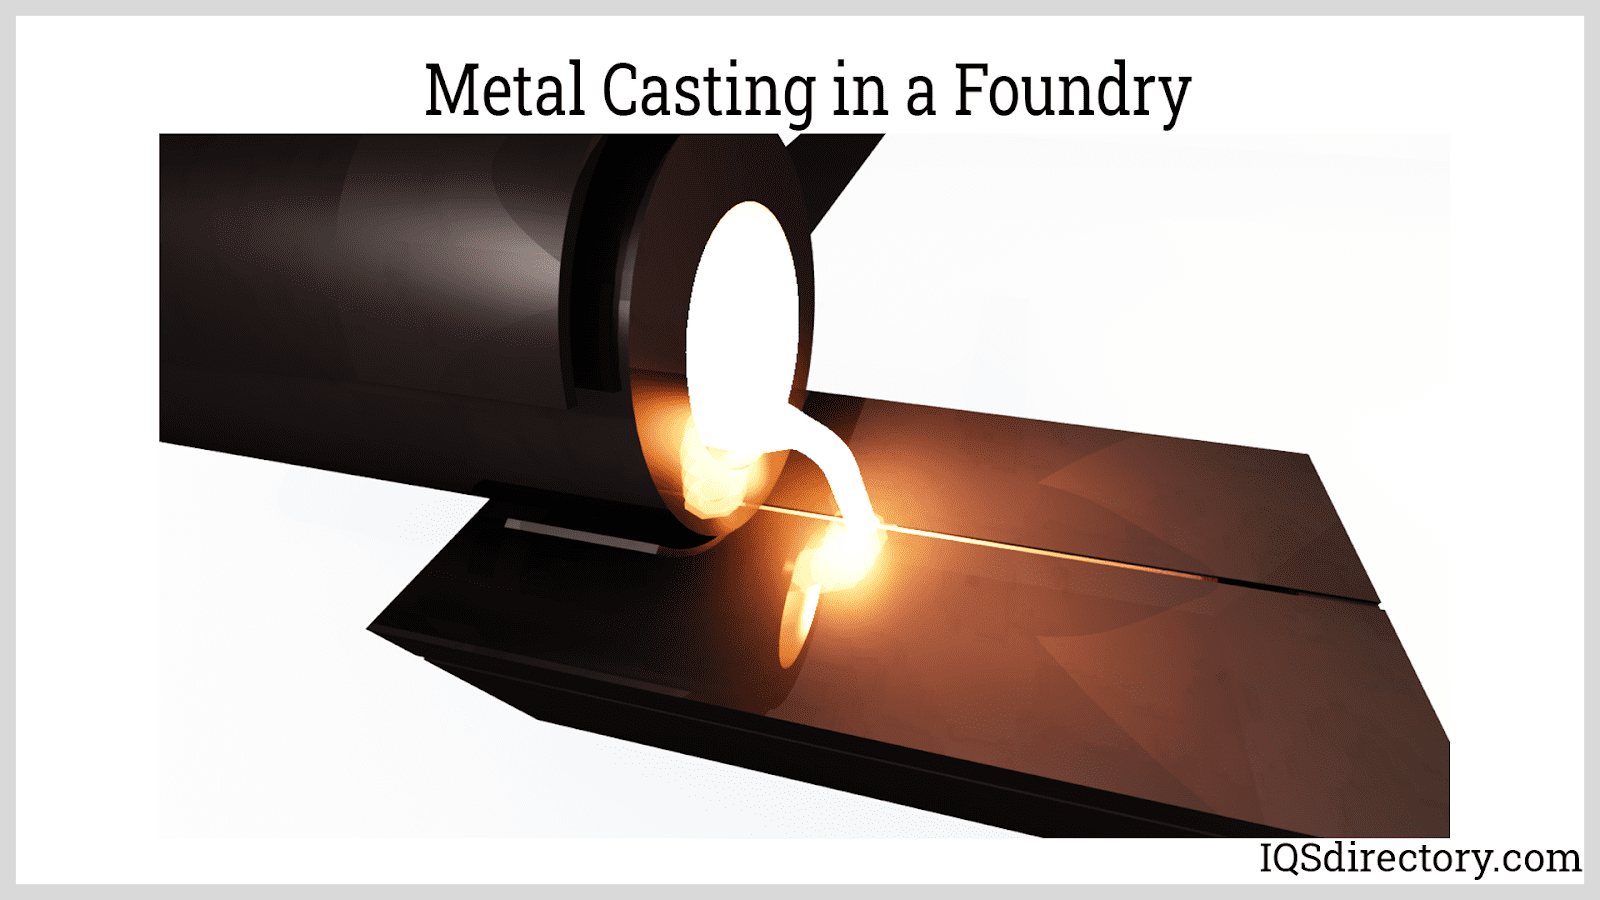 Metal Casting in a Foundry